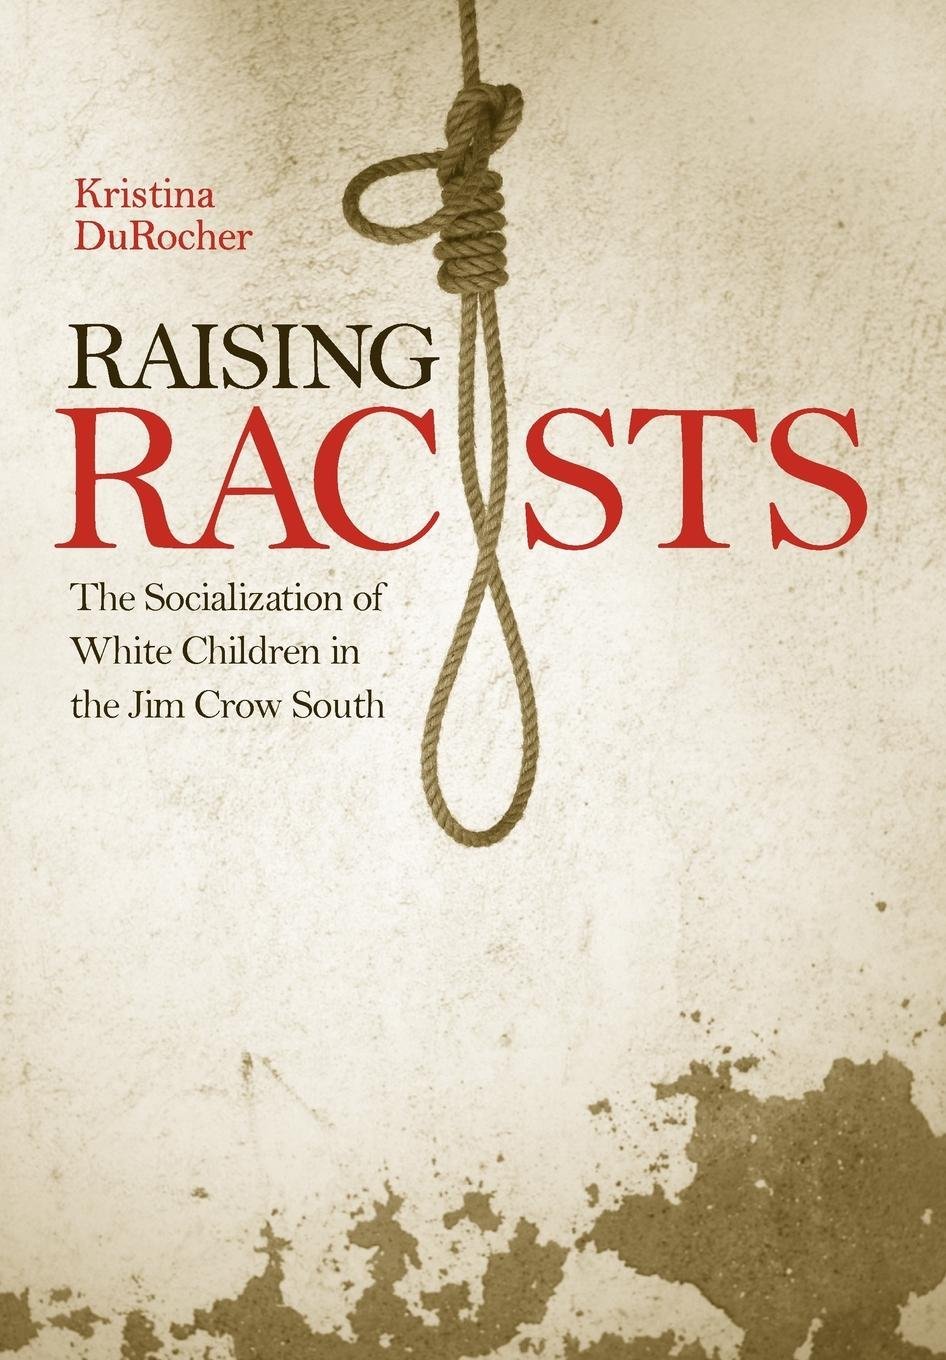 Raising Racists: The Socialization of White Children in the Jim Crow South